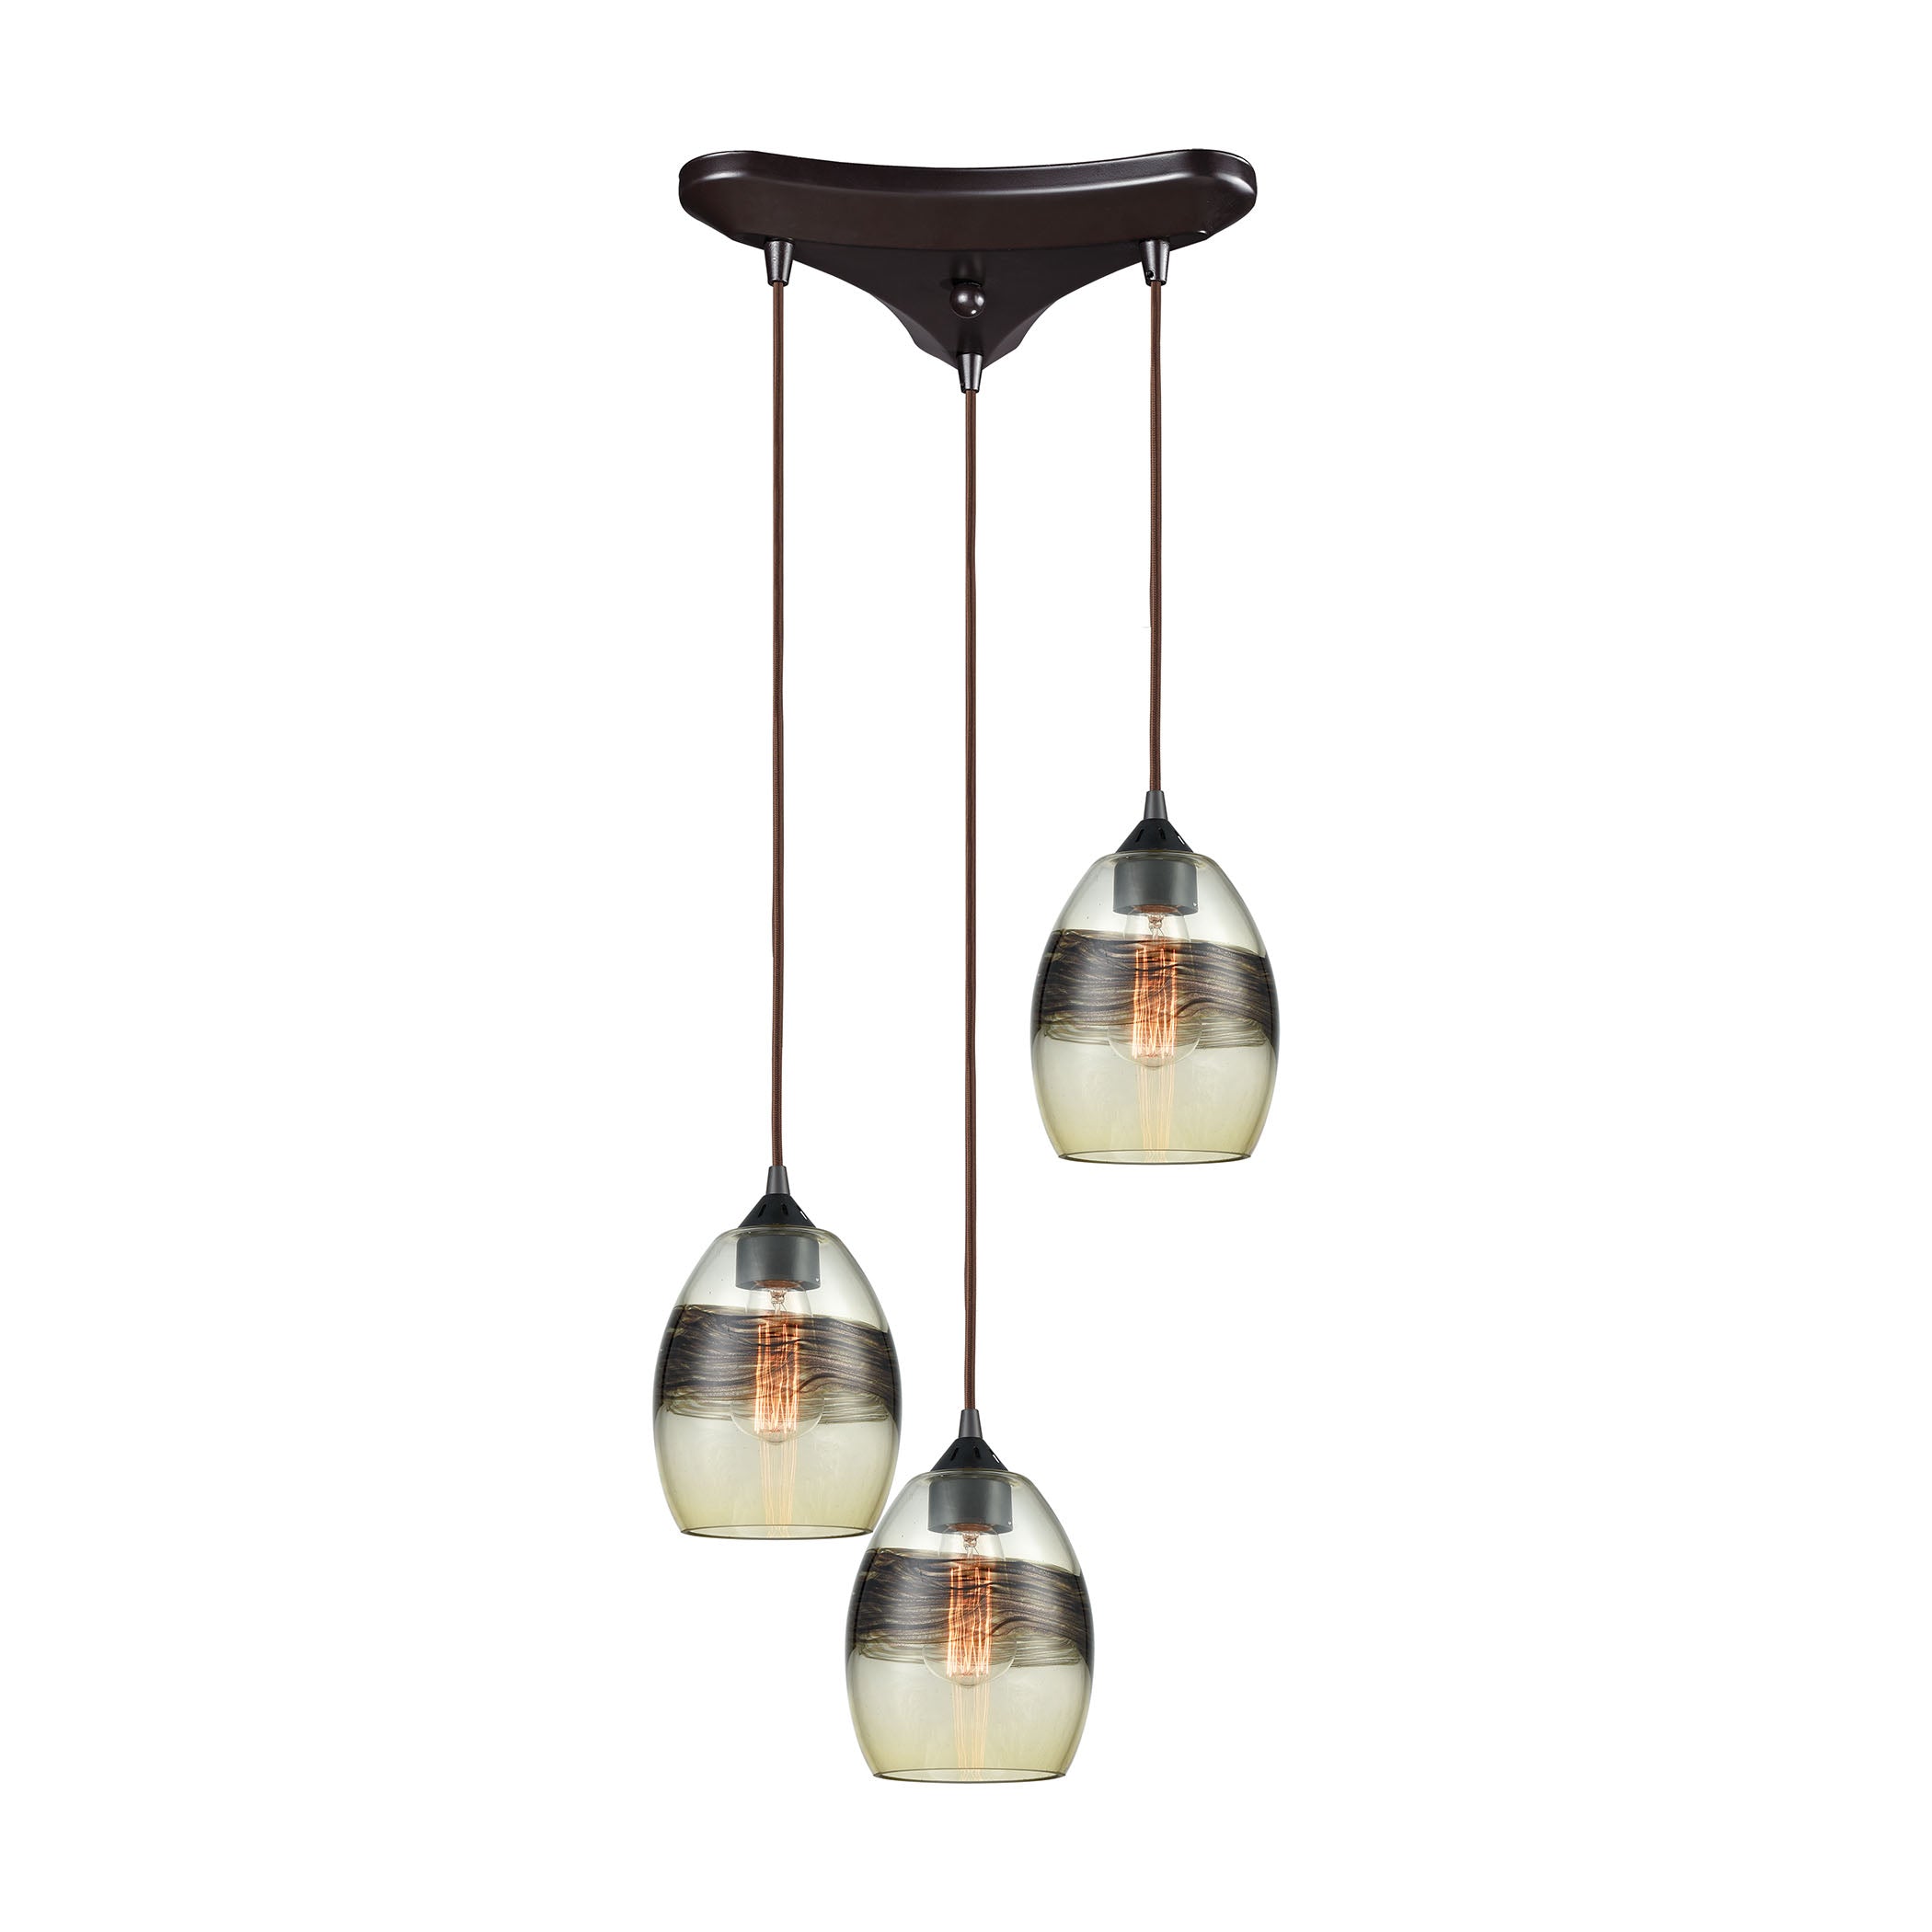 ELK Lighting 25122/3 Whisp 3-Light Triangular Pendant Fixture in Oil Rubbed Bronze with Champagne-plated Glass